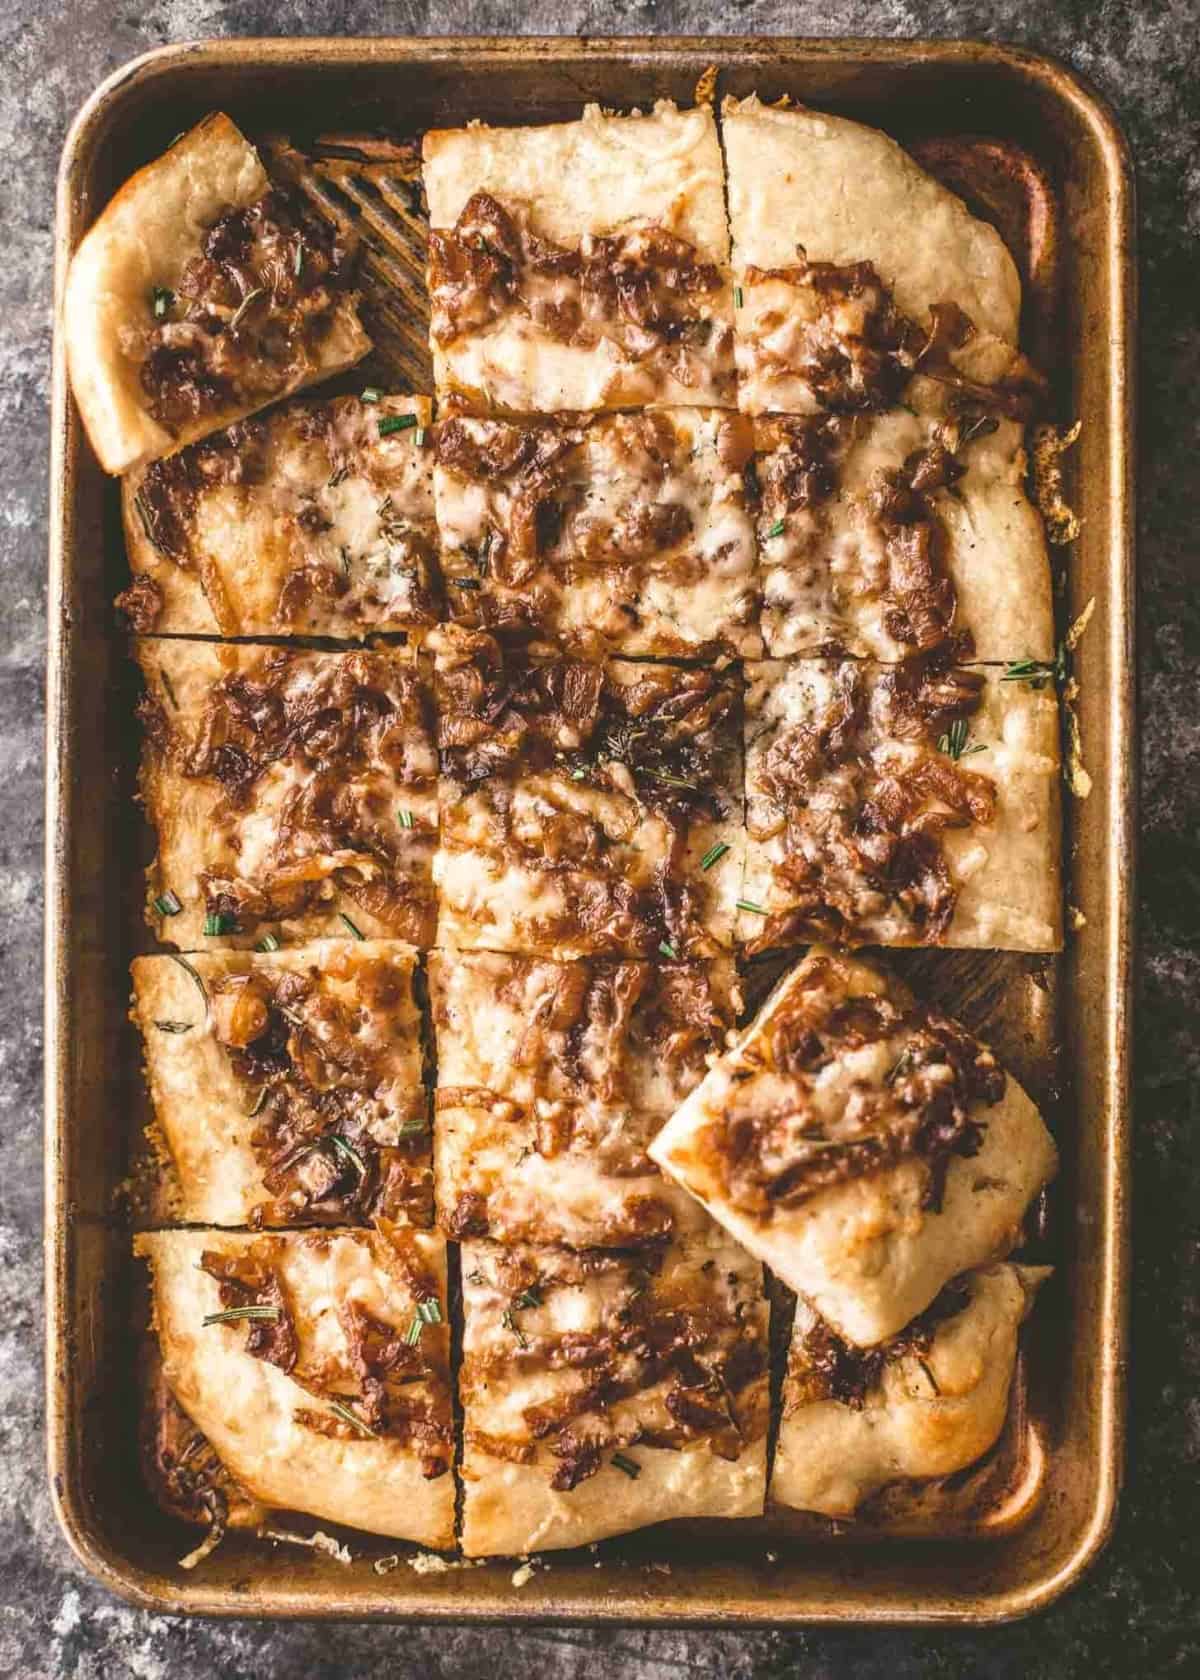 sliced pizza on a sheet pan